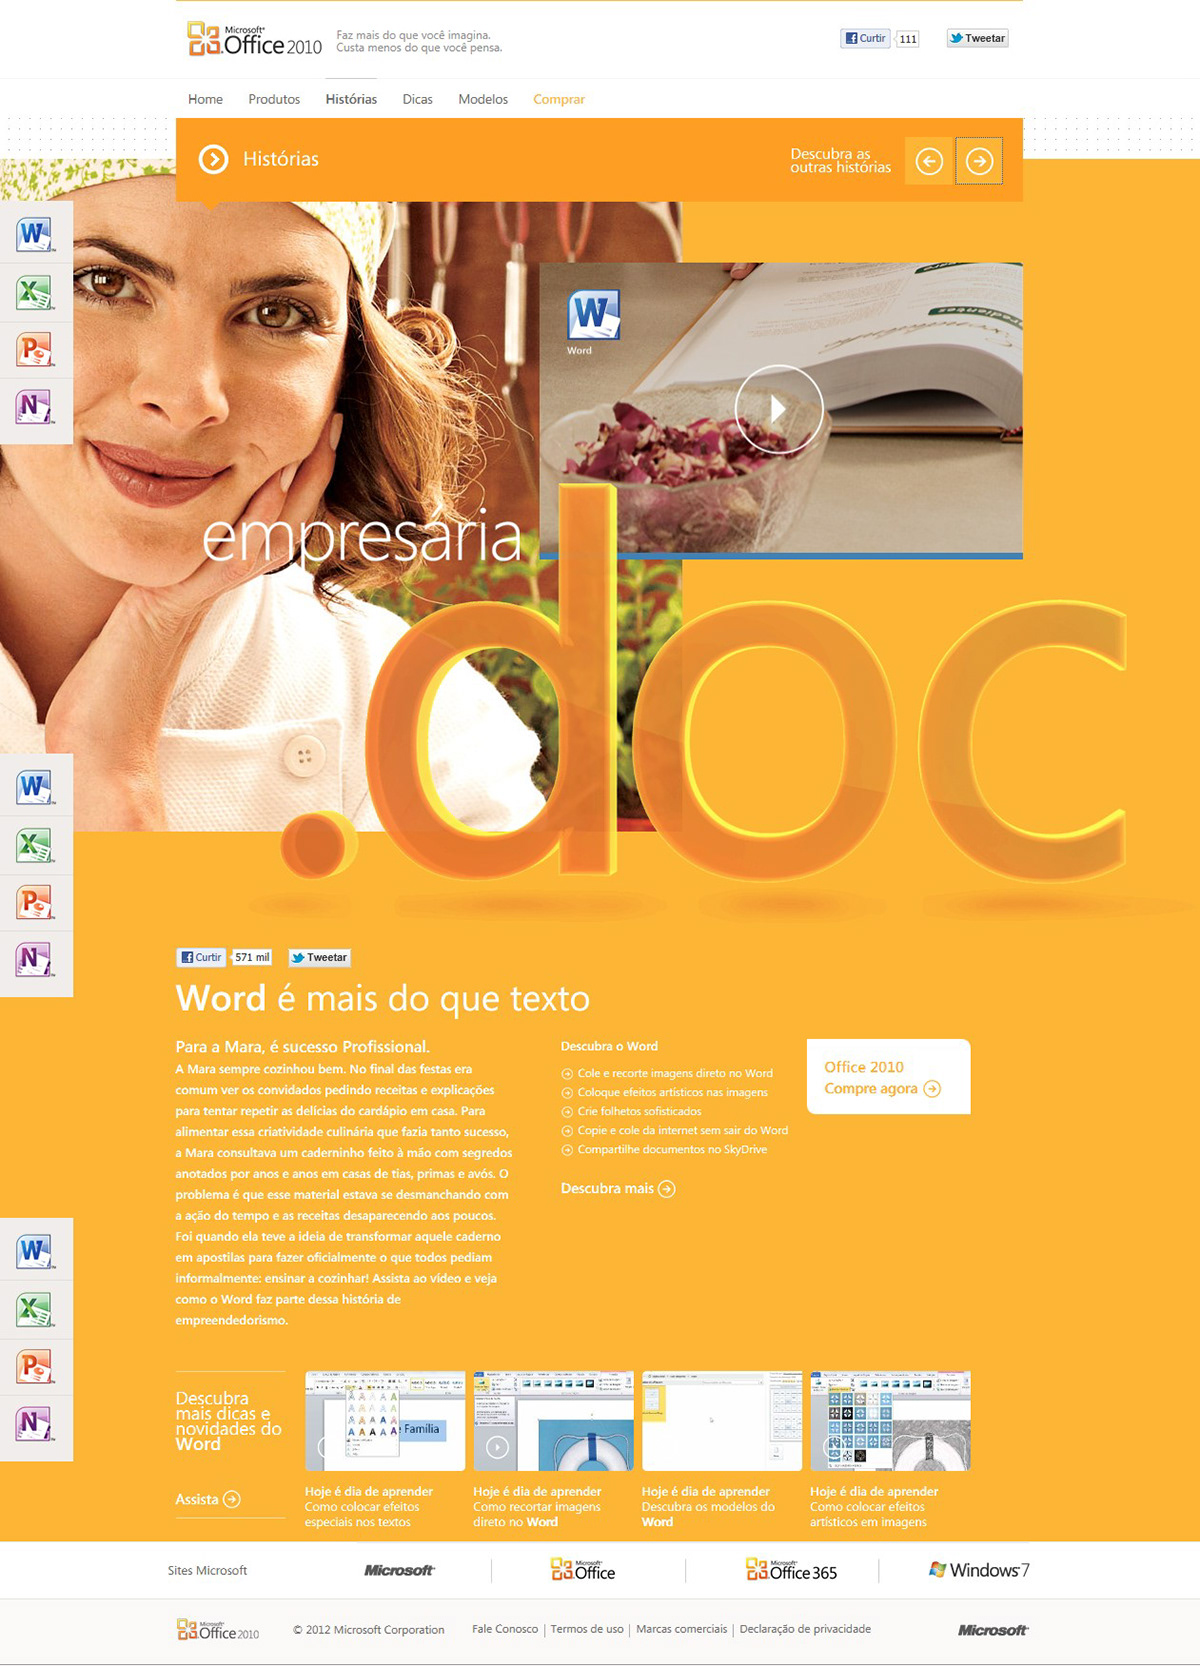 user experience User Experience Design Microsoft office2010